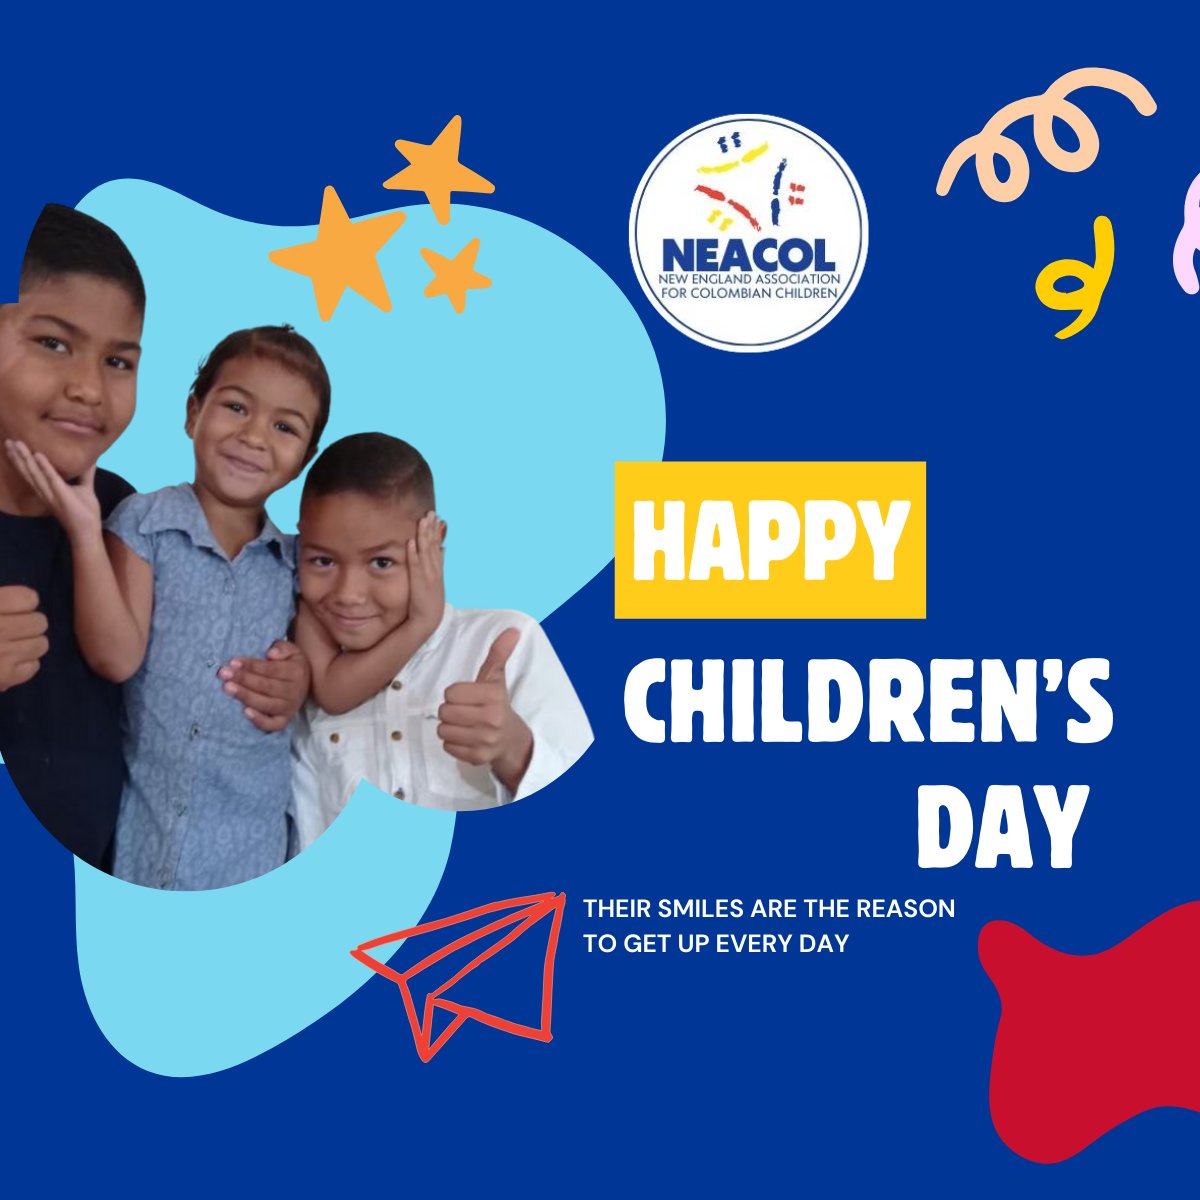 Today we celebrate Children's Day in Colombia, a date that reminds us of the importance of every smile and the promise of every young look. At NEACOL, we firmly believe that investing in children is building the future. 

#ChildNutrition #ChildrenEducation #ChildrenHealth